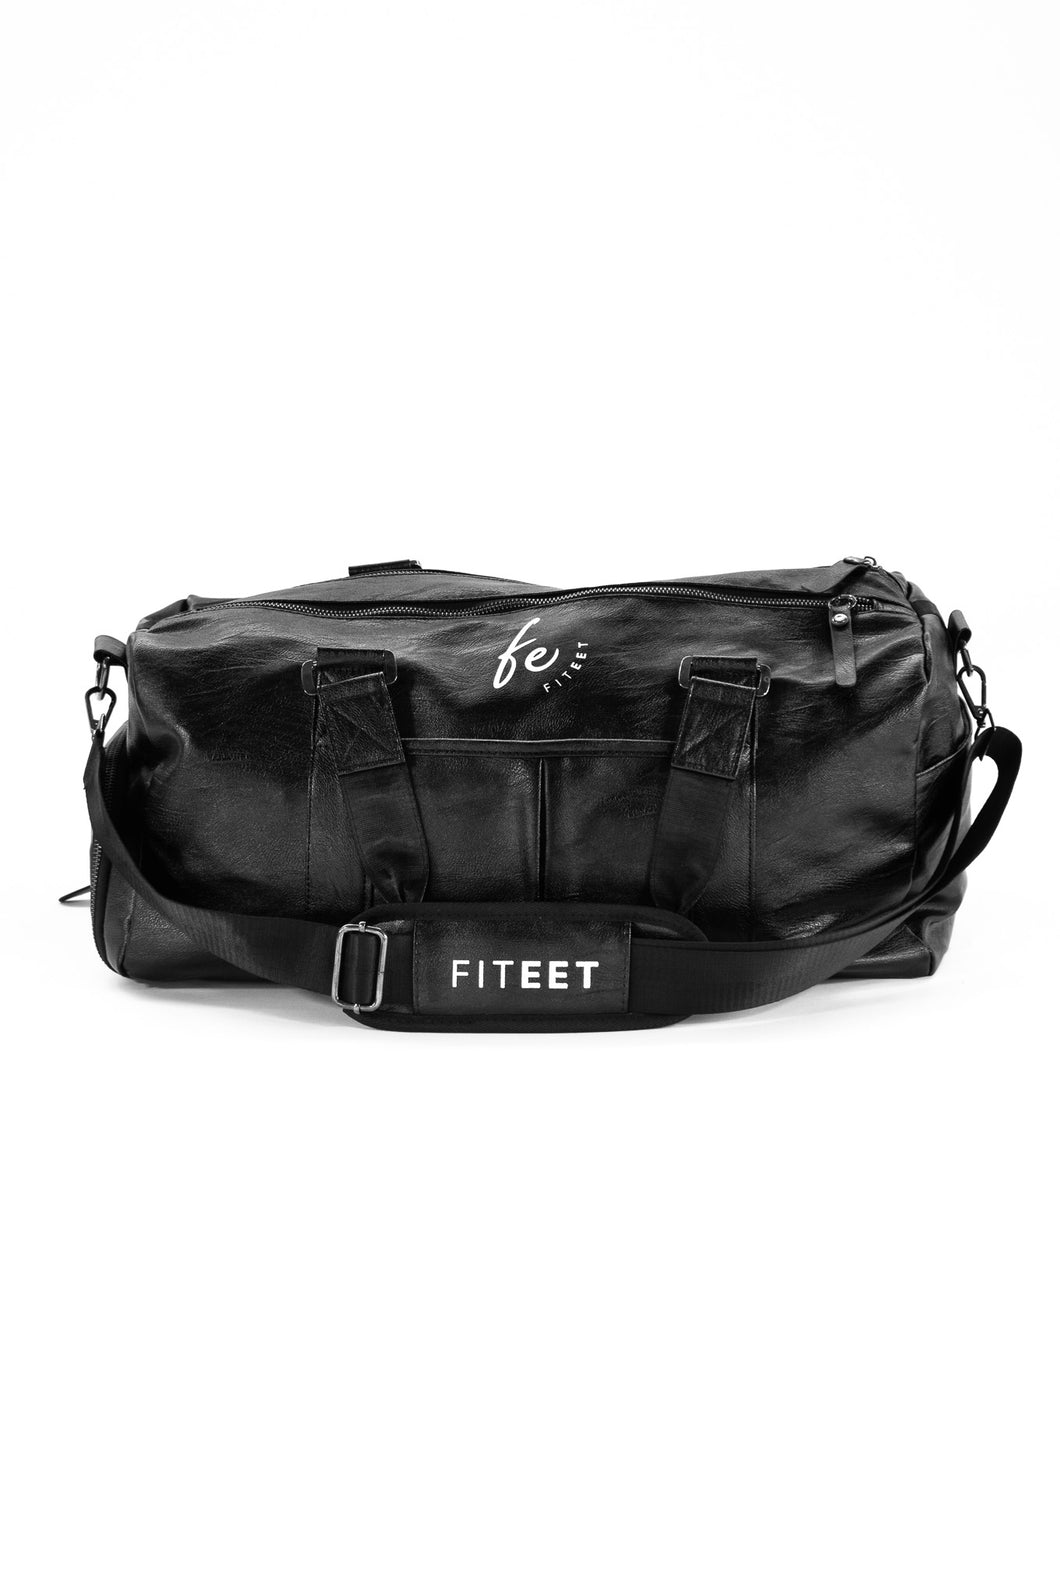 CHARCOAL BLACK WITH IVORY LUXURY SPORT DUFFLE BAG